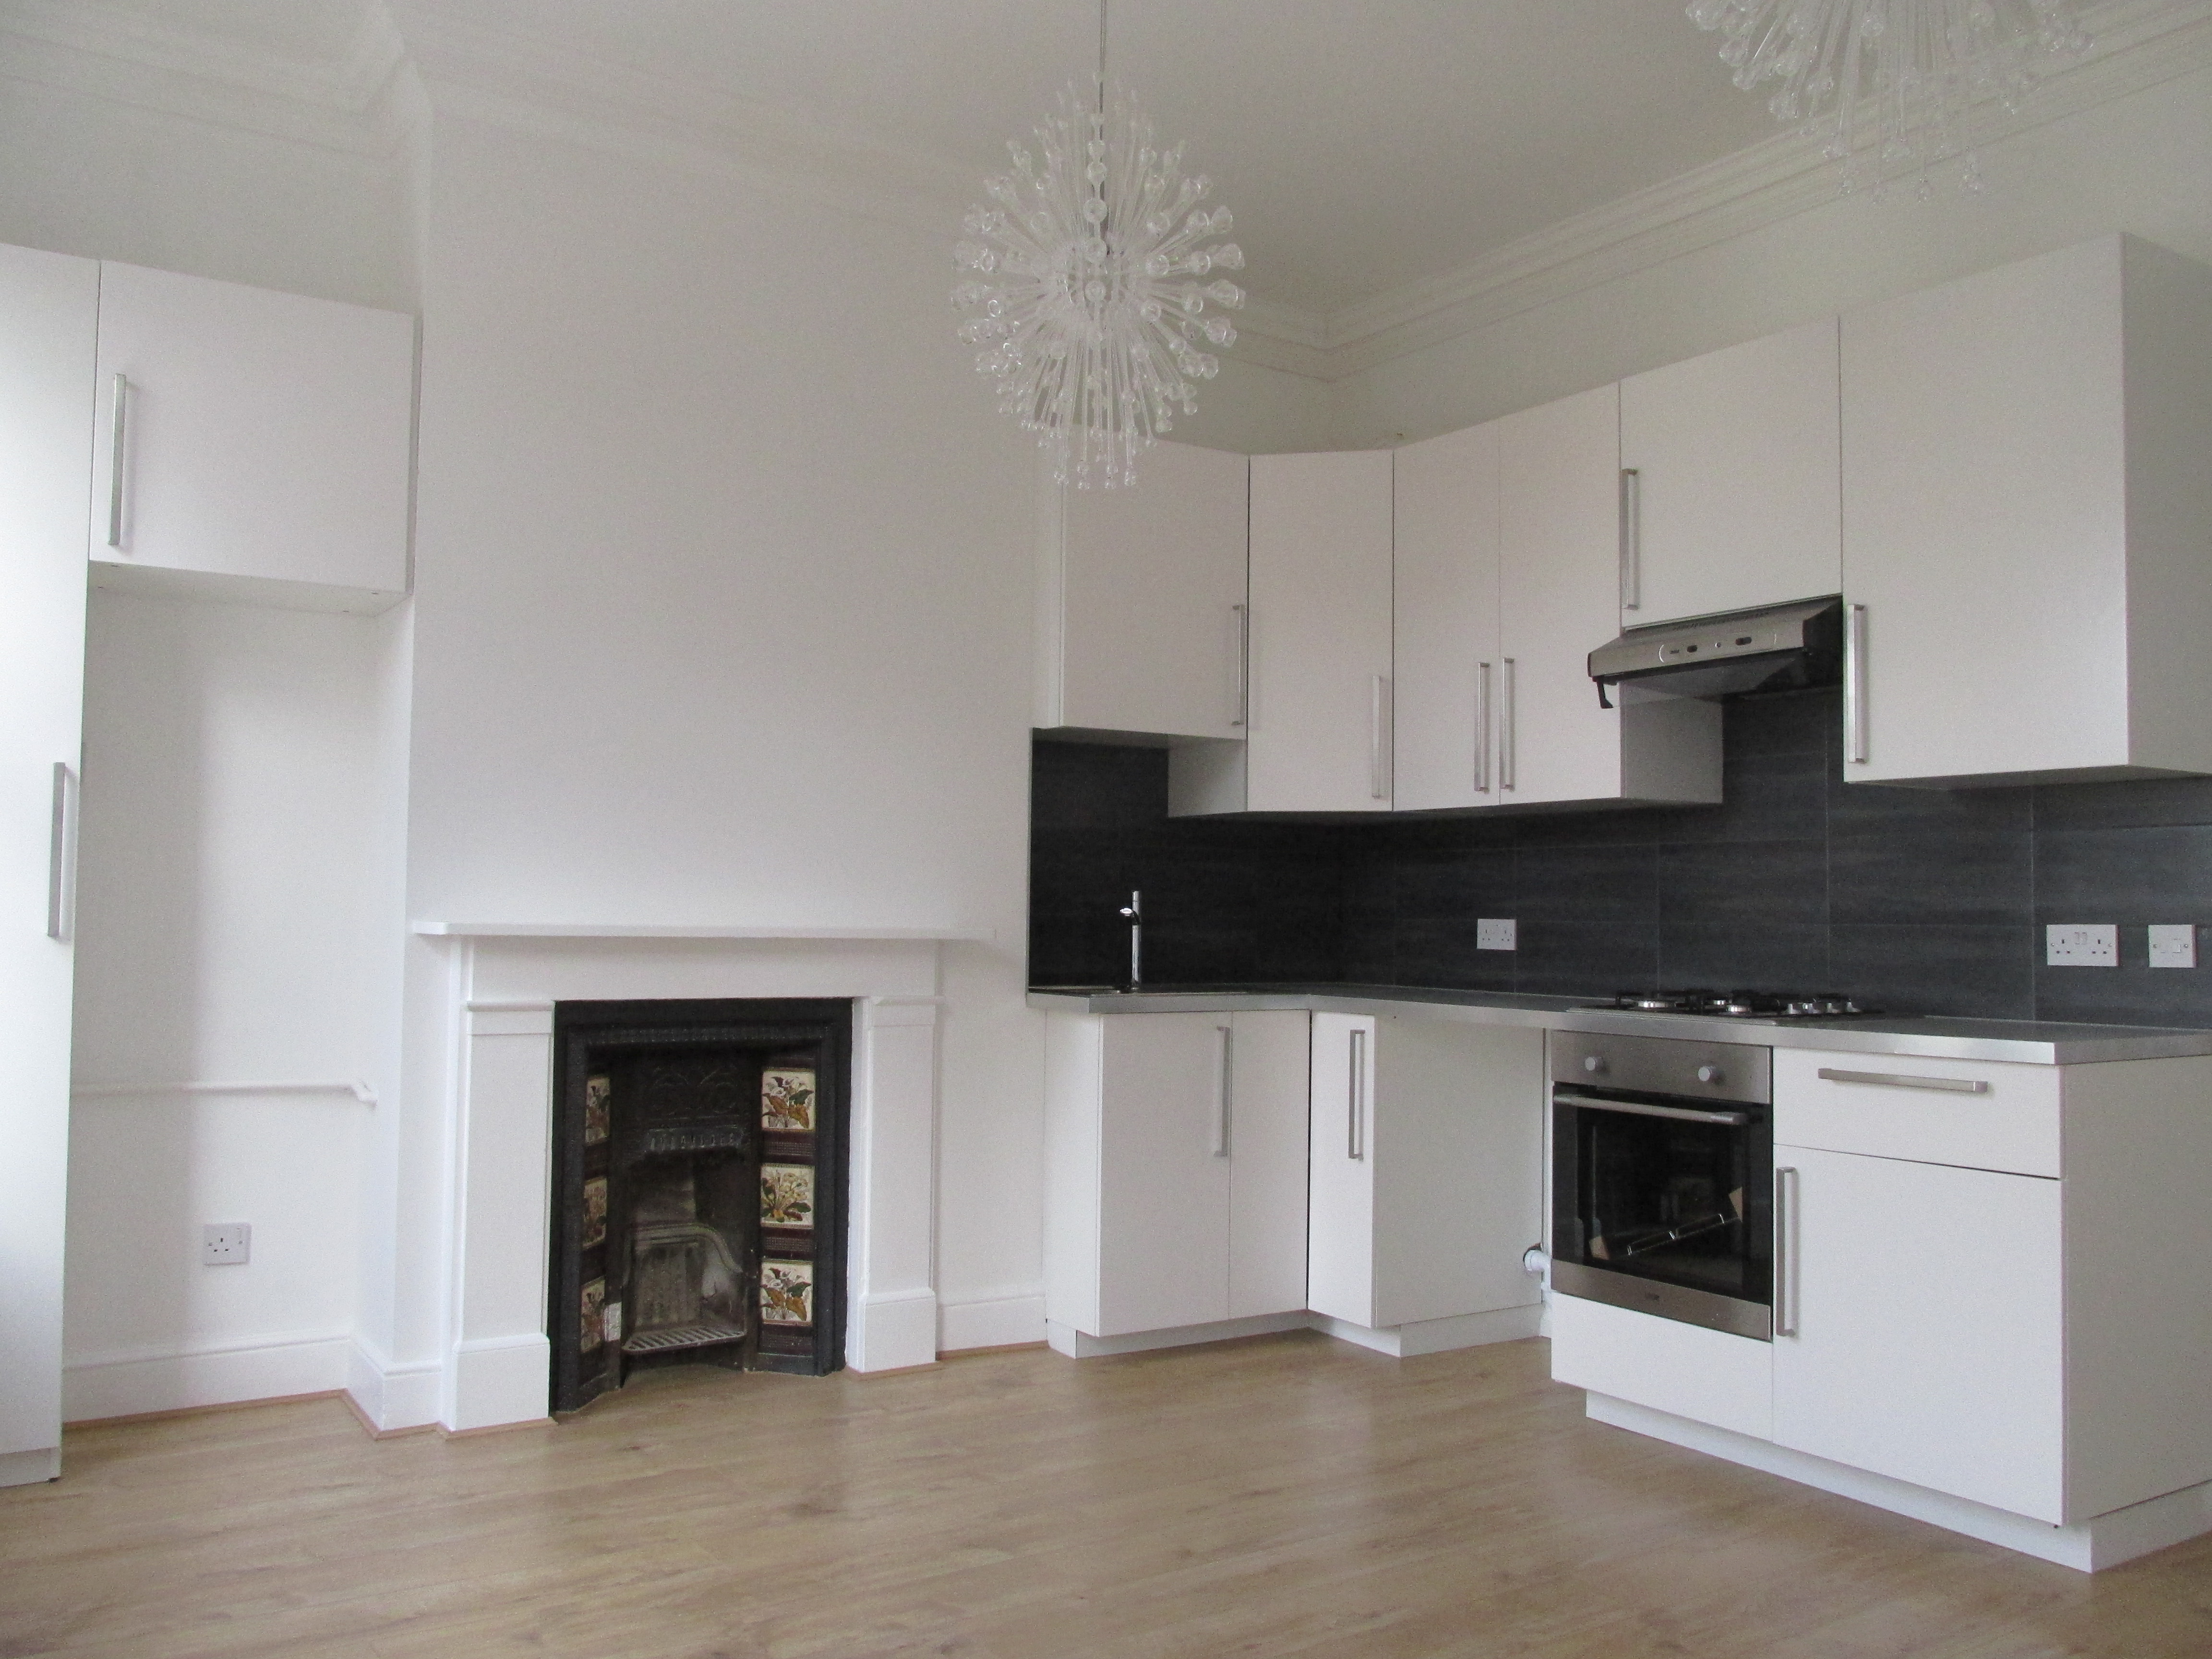 Spacious 2 bedroom flat to let situated in Stoke Newington High Street, London N16.